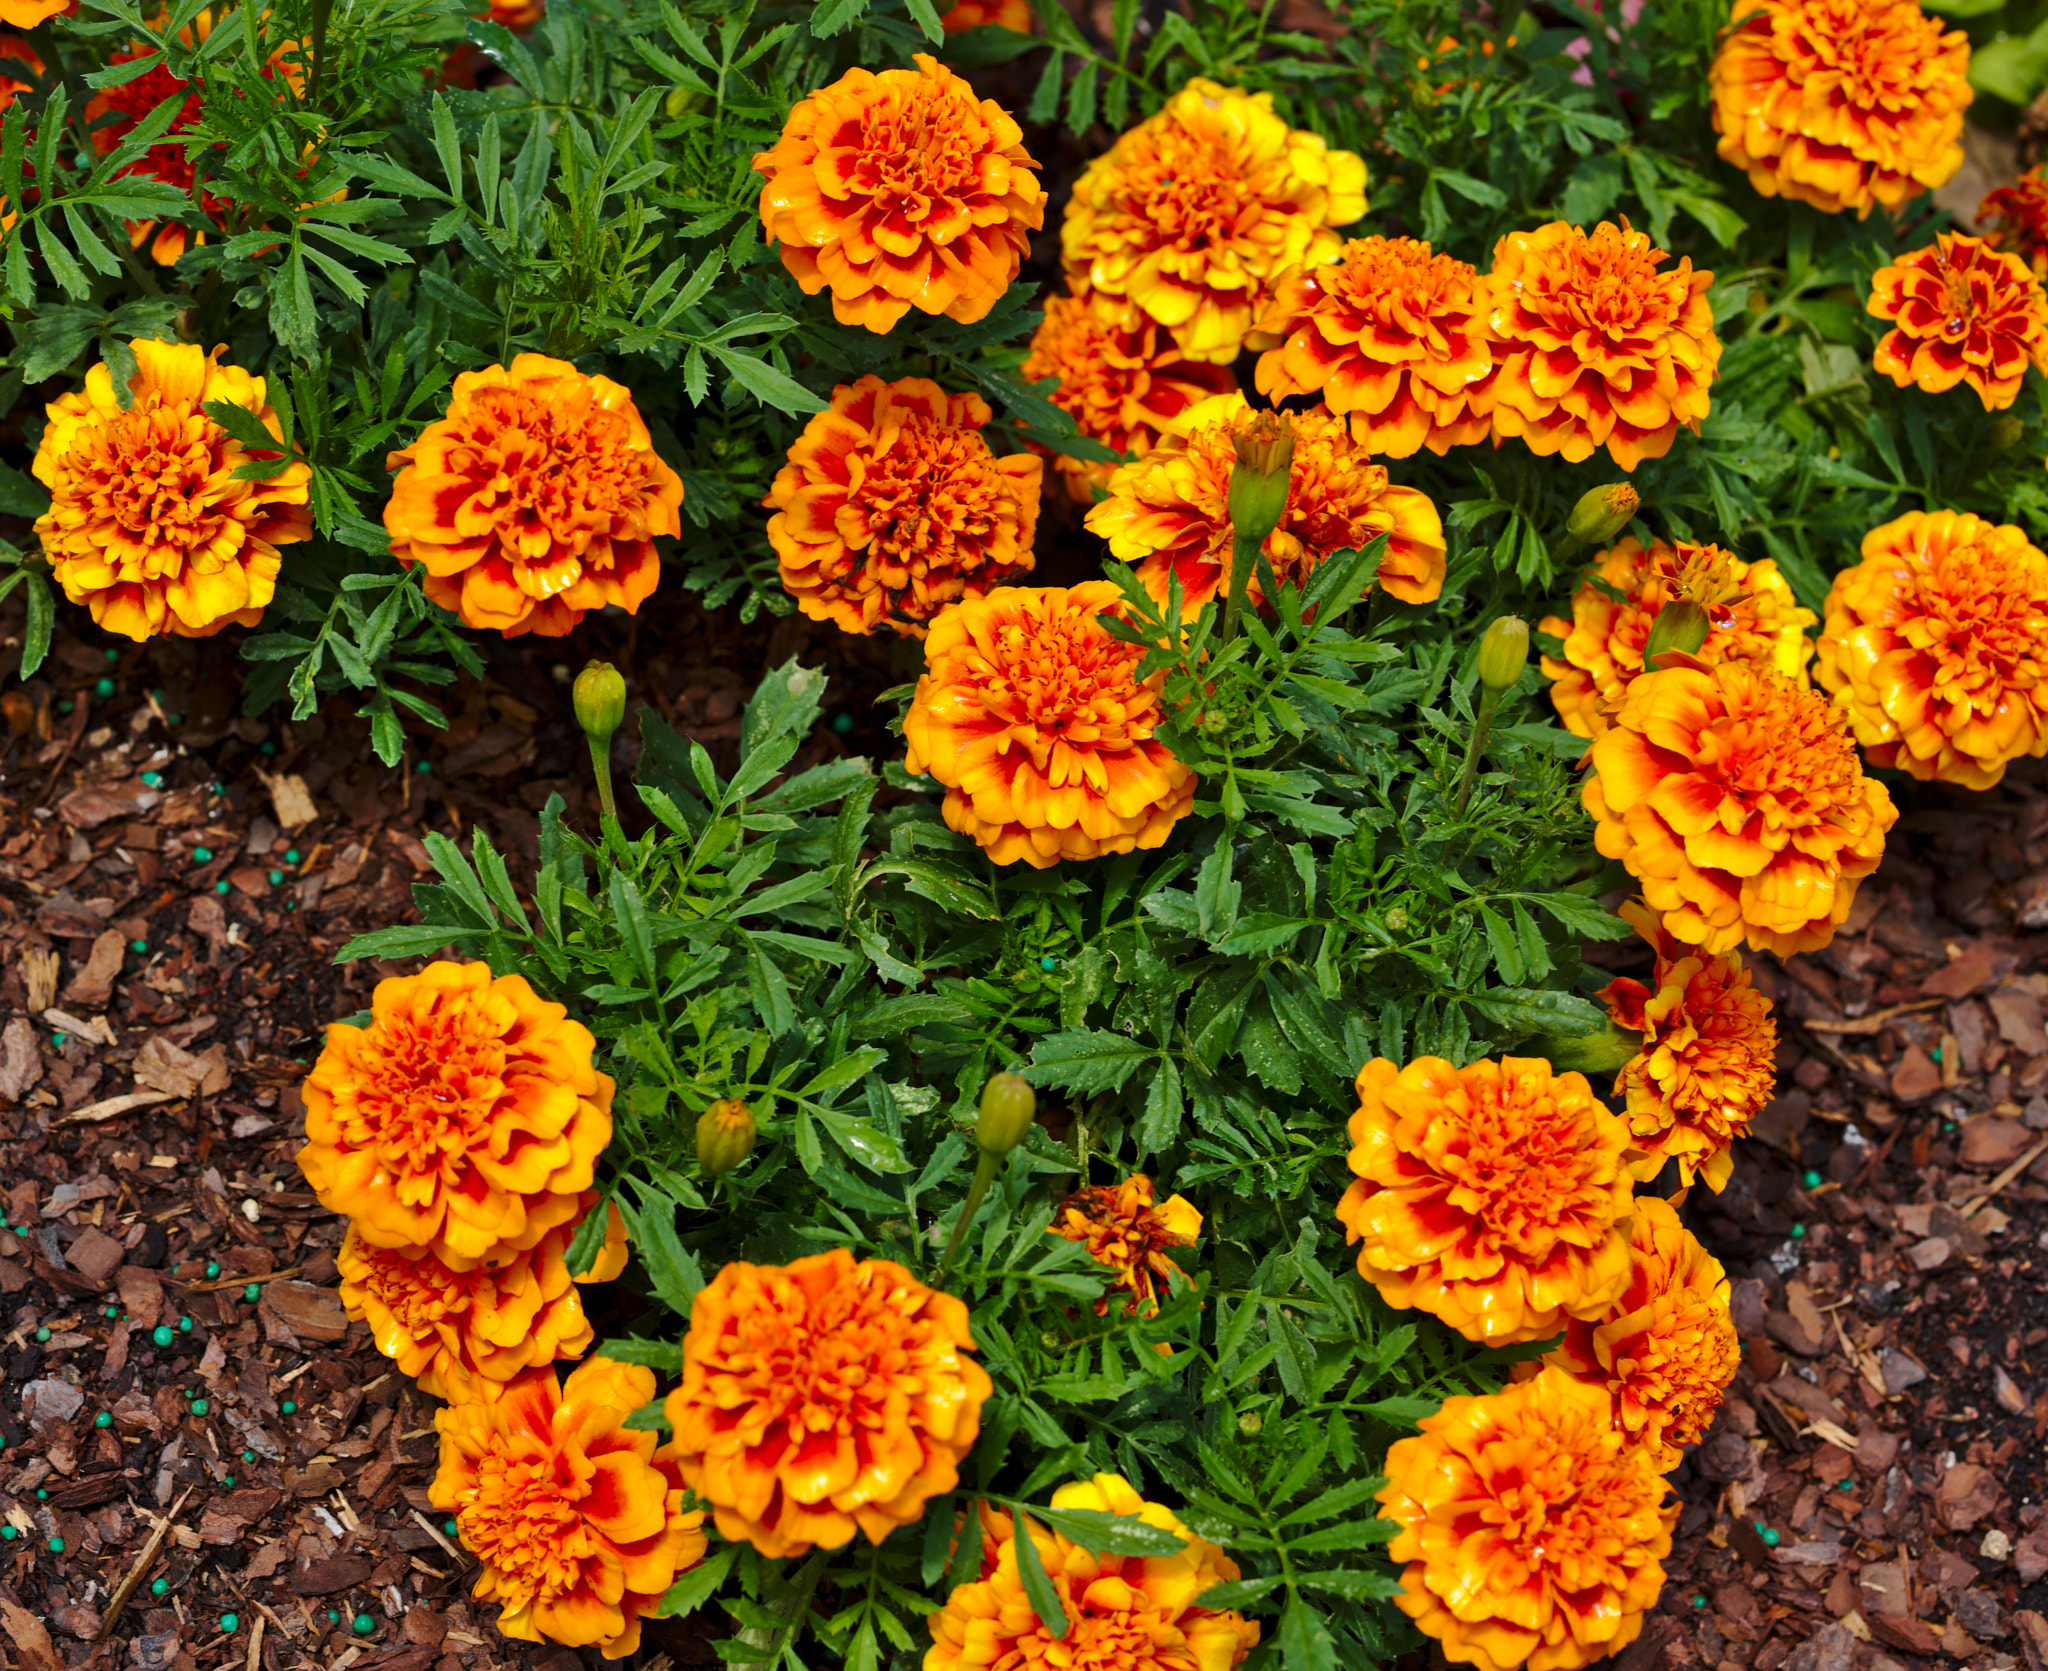 ZEISS Otus 85mm F1.4 sample photo. French marigold / tagetes patula / chica flame photography